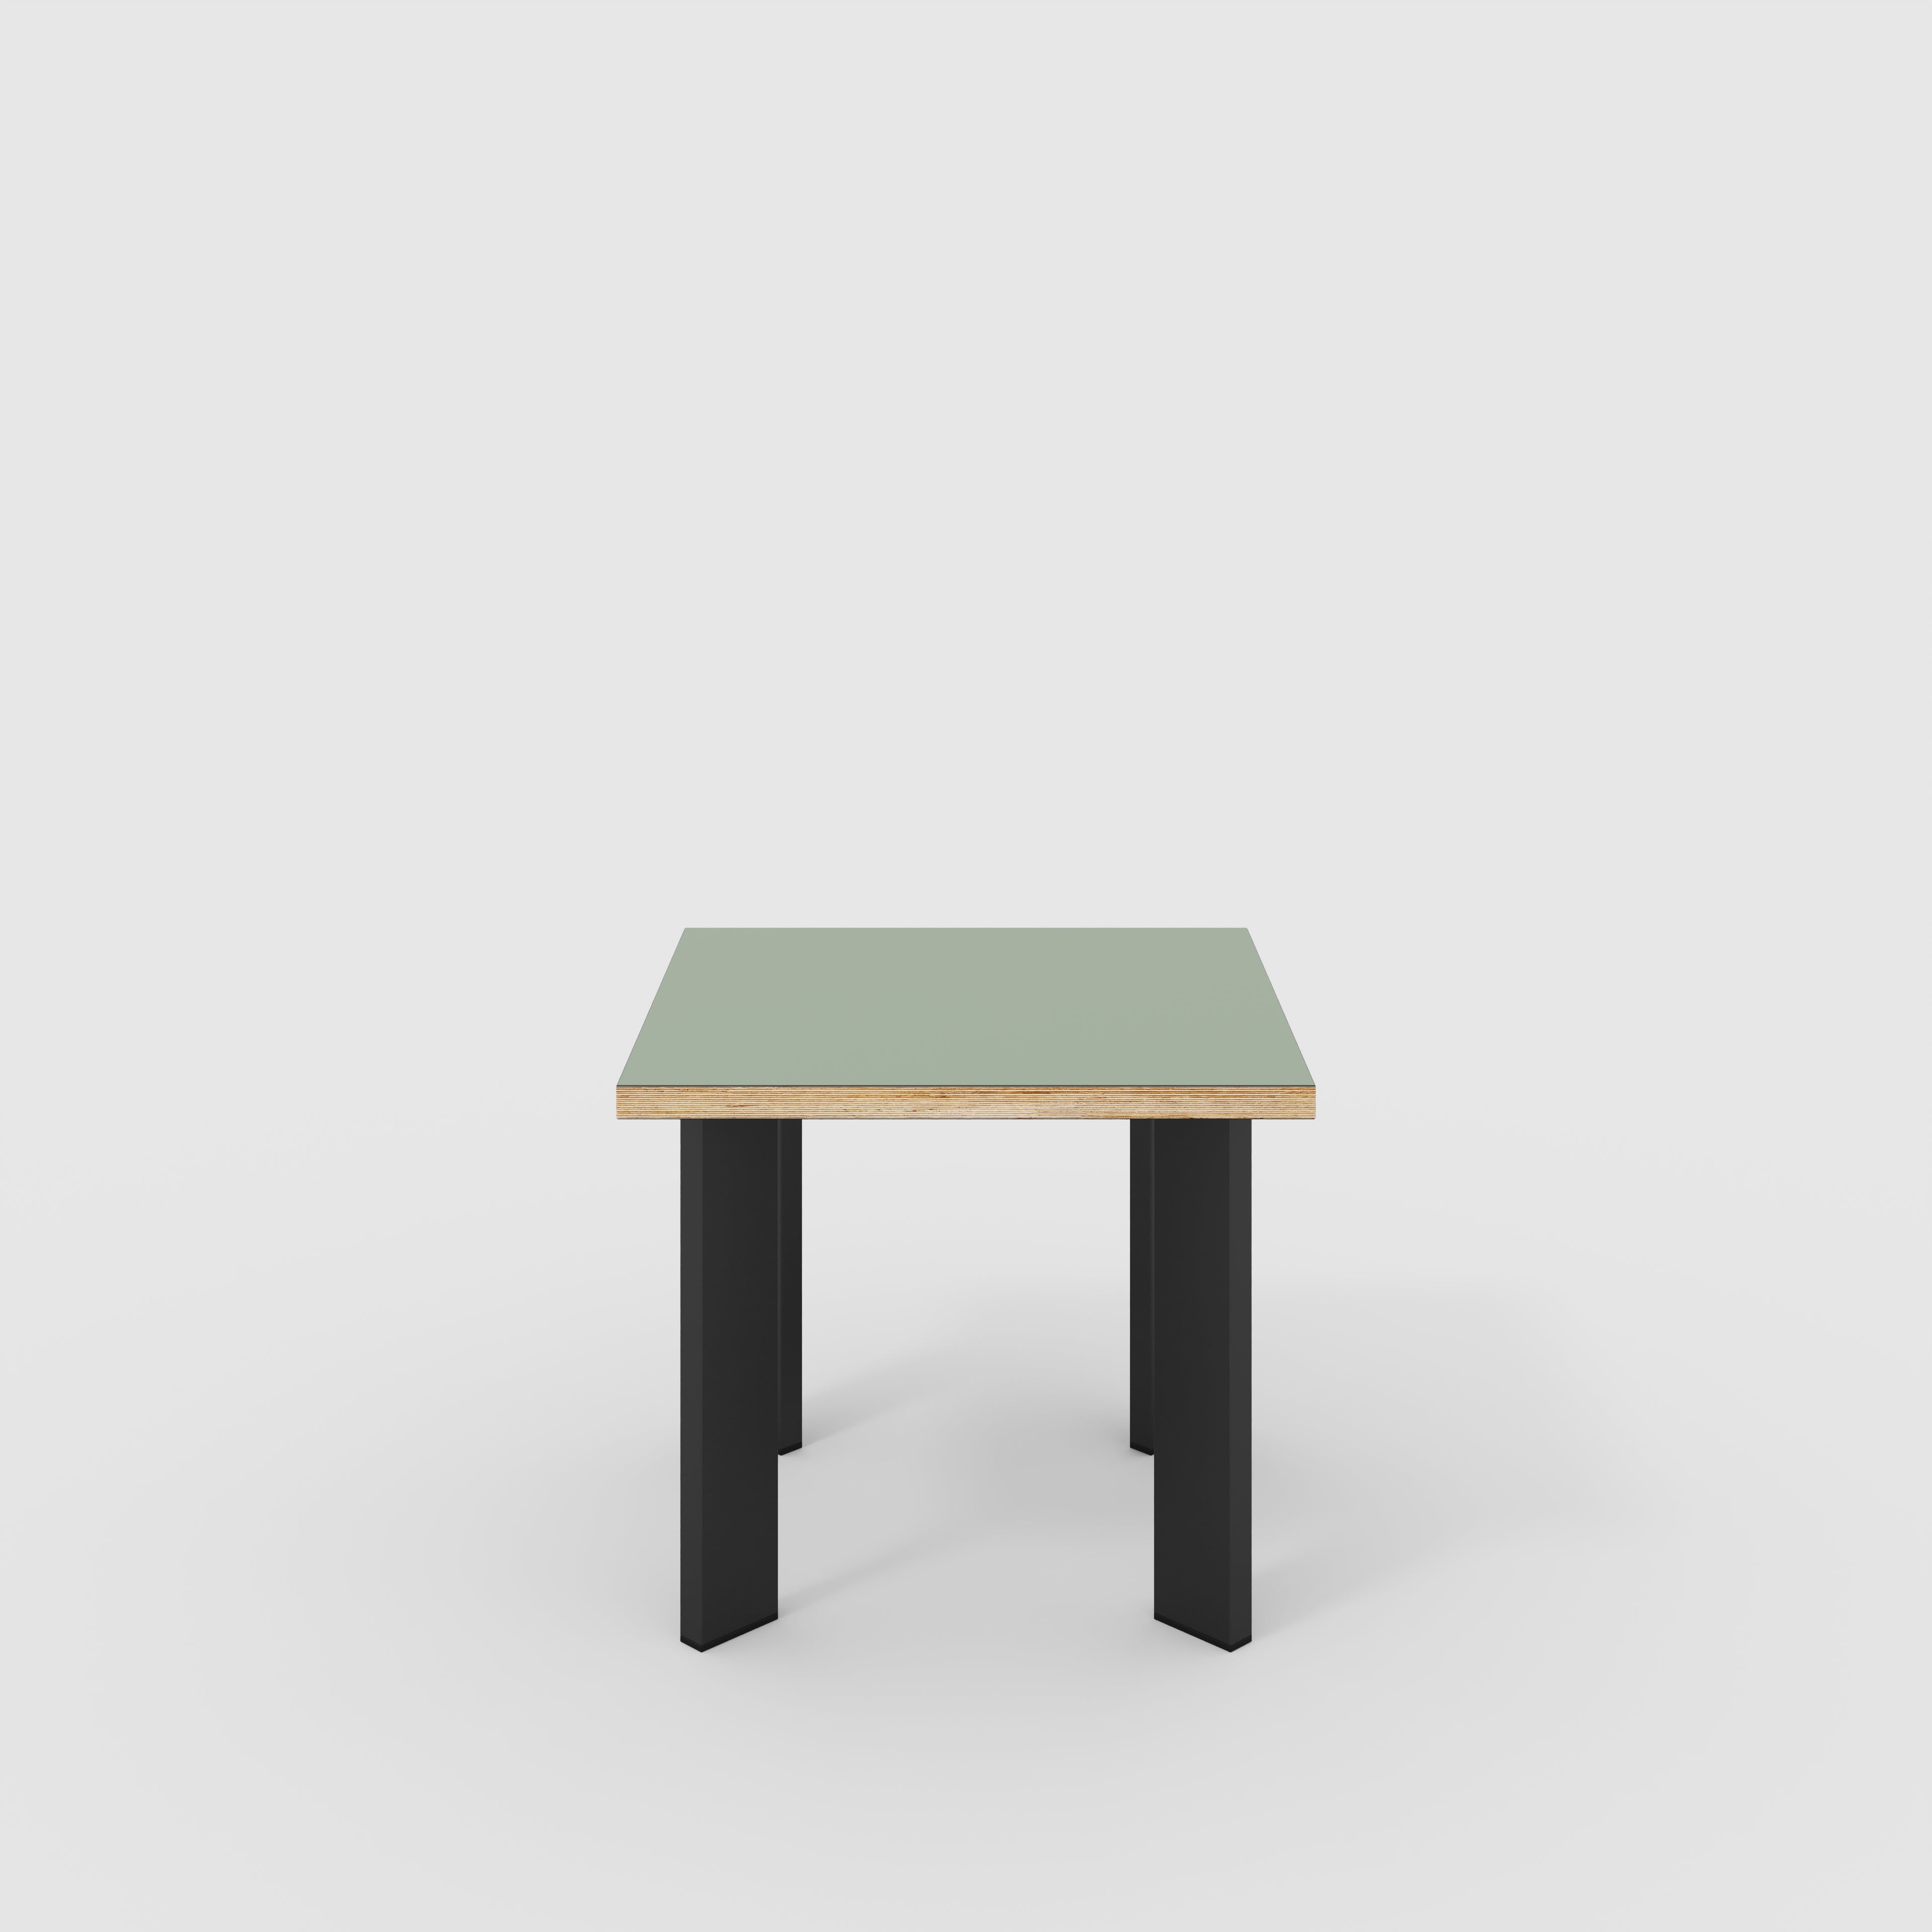 Side Table with Rectangular Single Pin Legs - Formica Green Slate - 500(w) x 500(d) x 425(h)